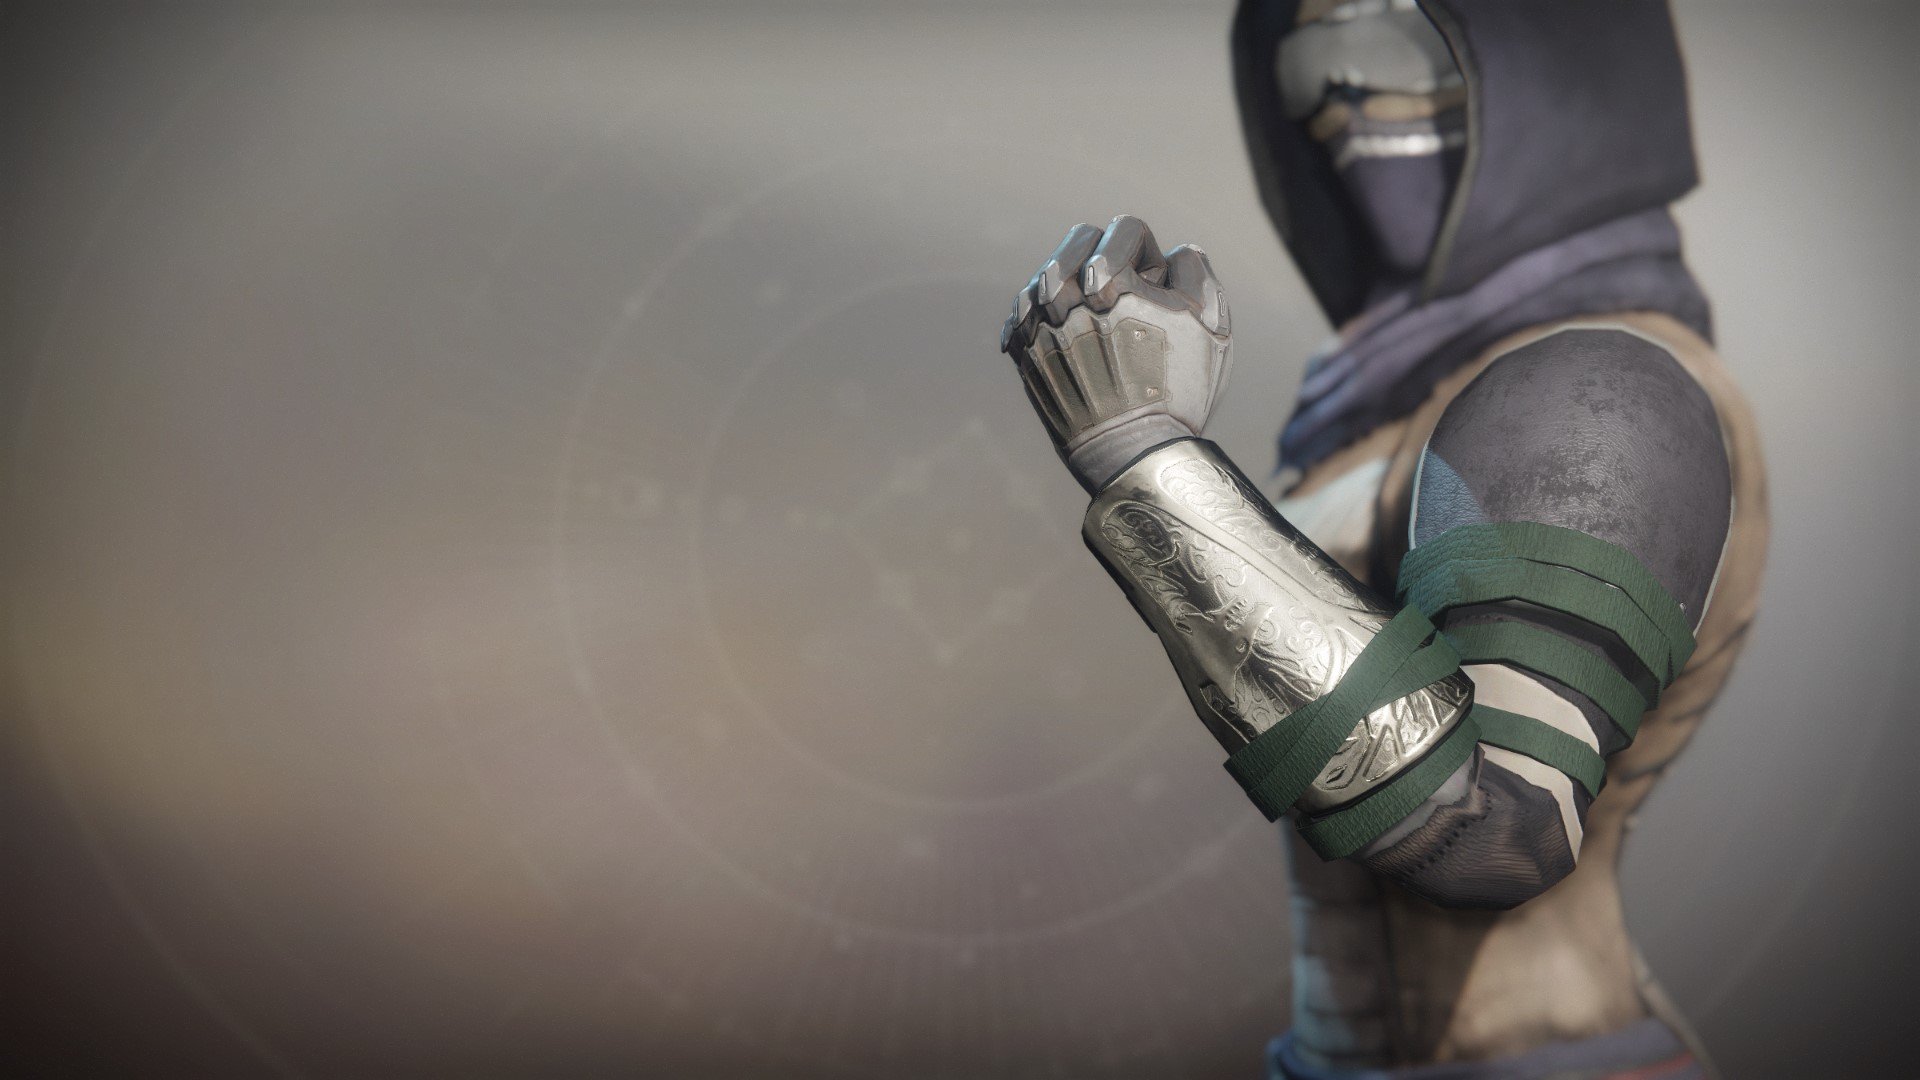 An in-game render of the Iron Pledge Ornament.